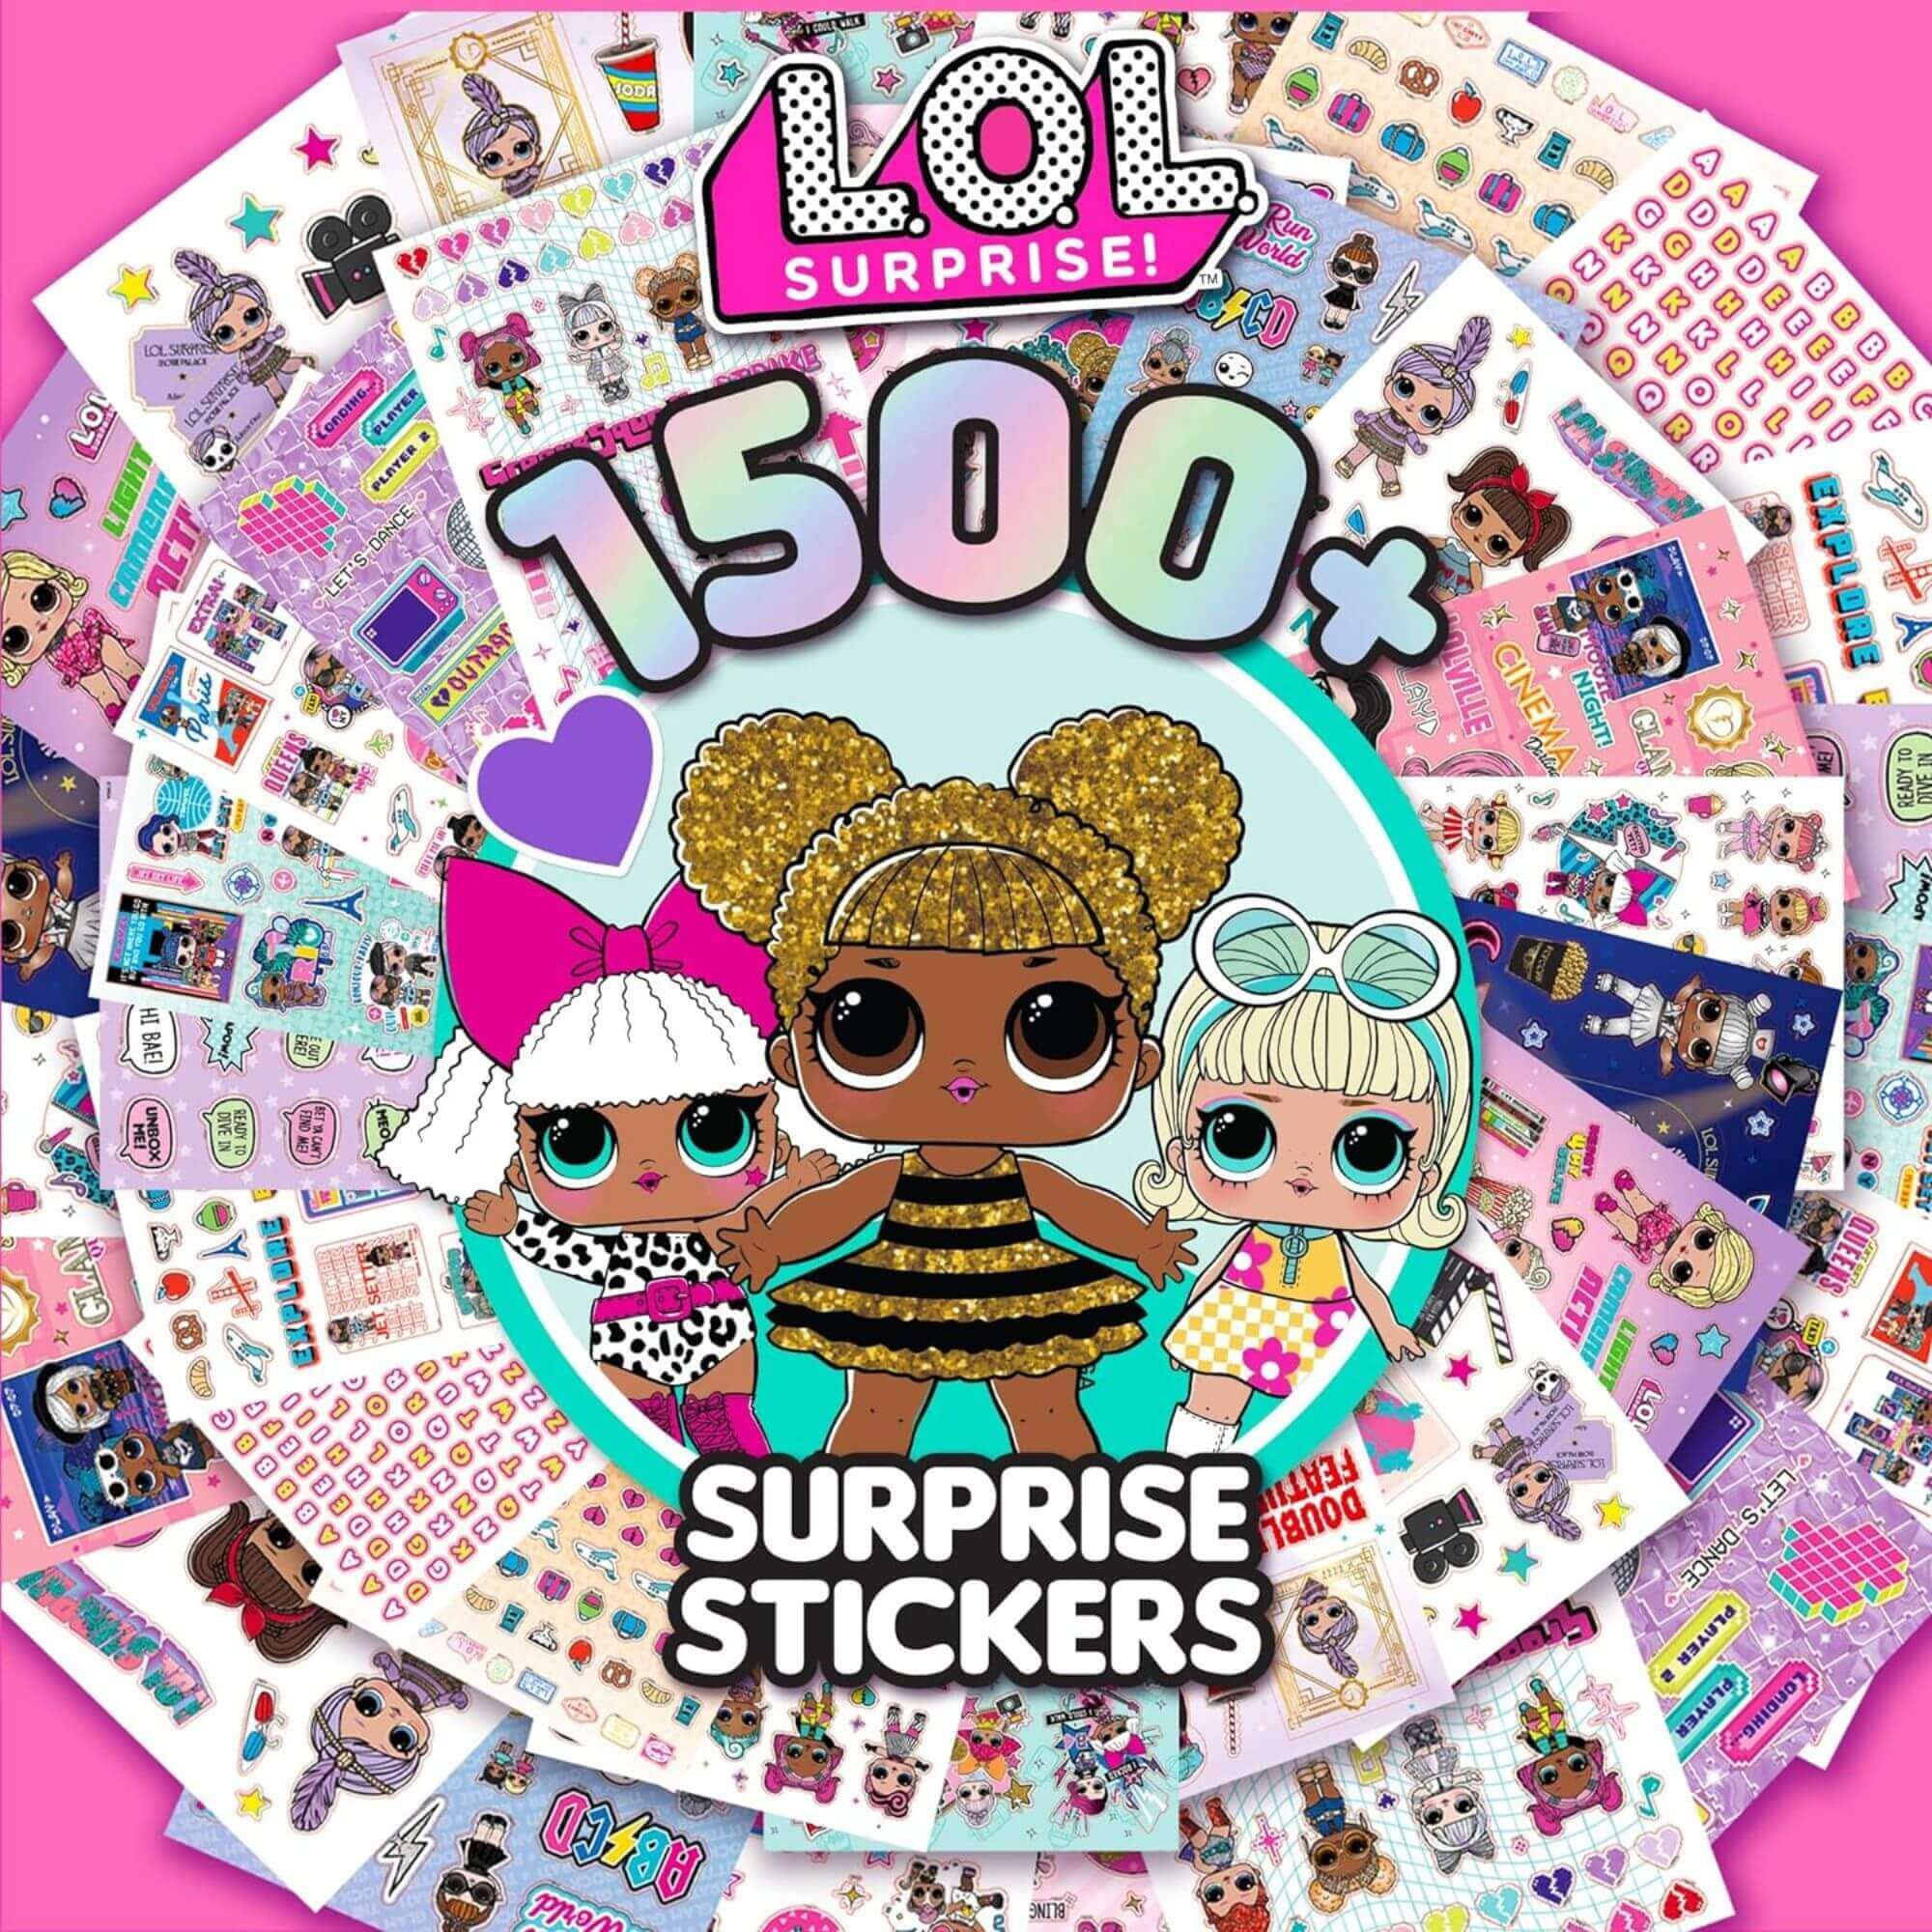 LOL Surprise Stickers for kids